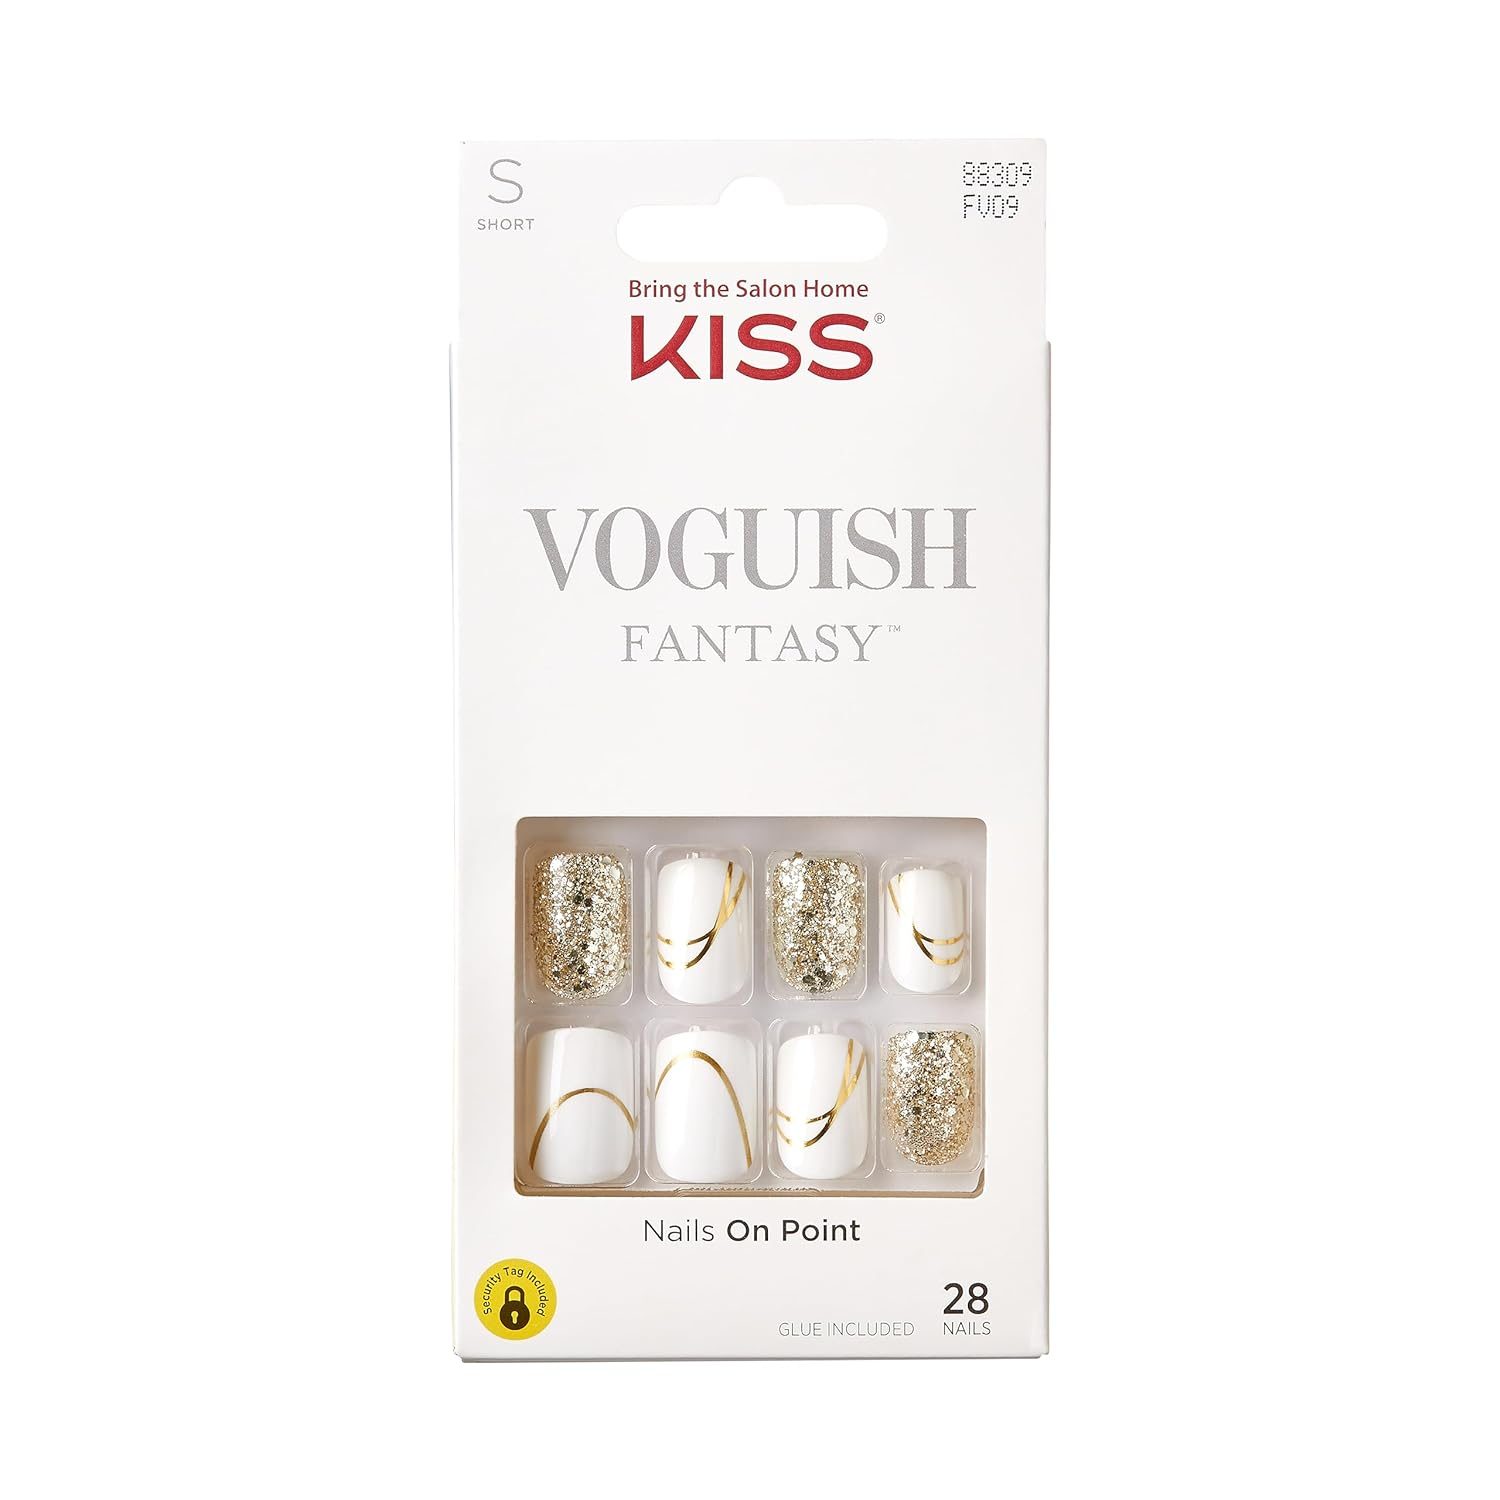 KISS Voguish Fantasy Press On Nails, Nail glue included, Glam and Glow', White, Short Size, Squoval Shape, Includes 28 Nails, 2g glue, 1 Manicure Stick, 1 Mini File